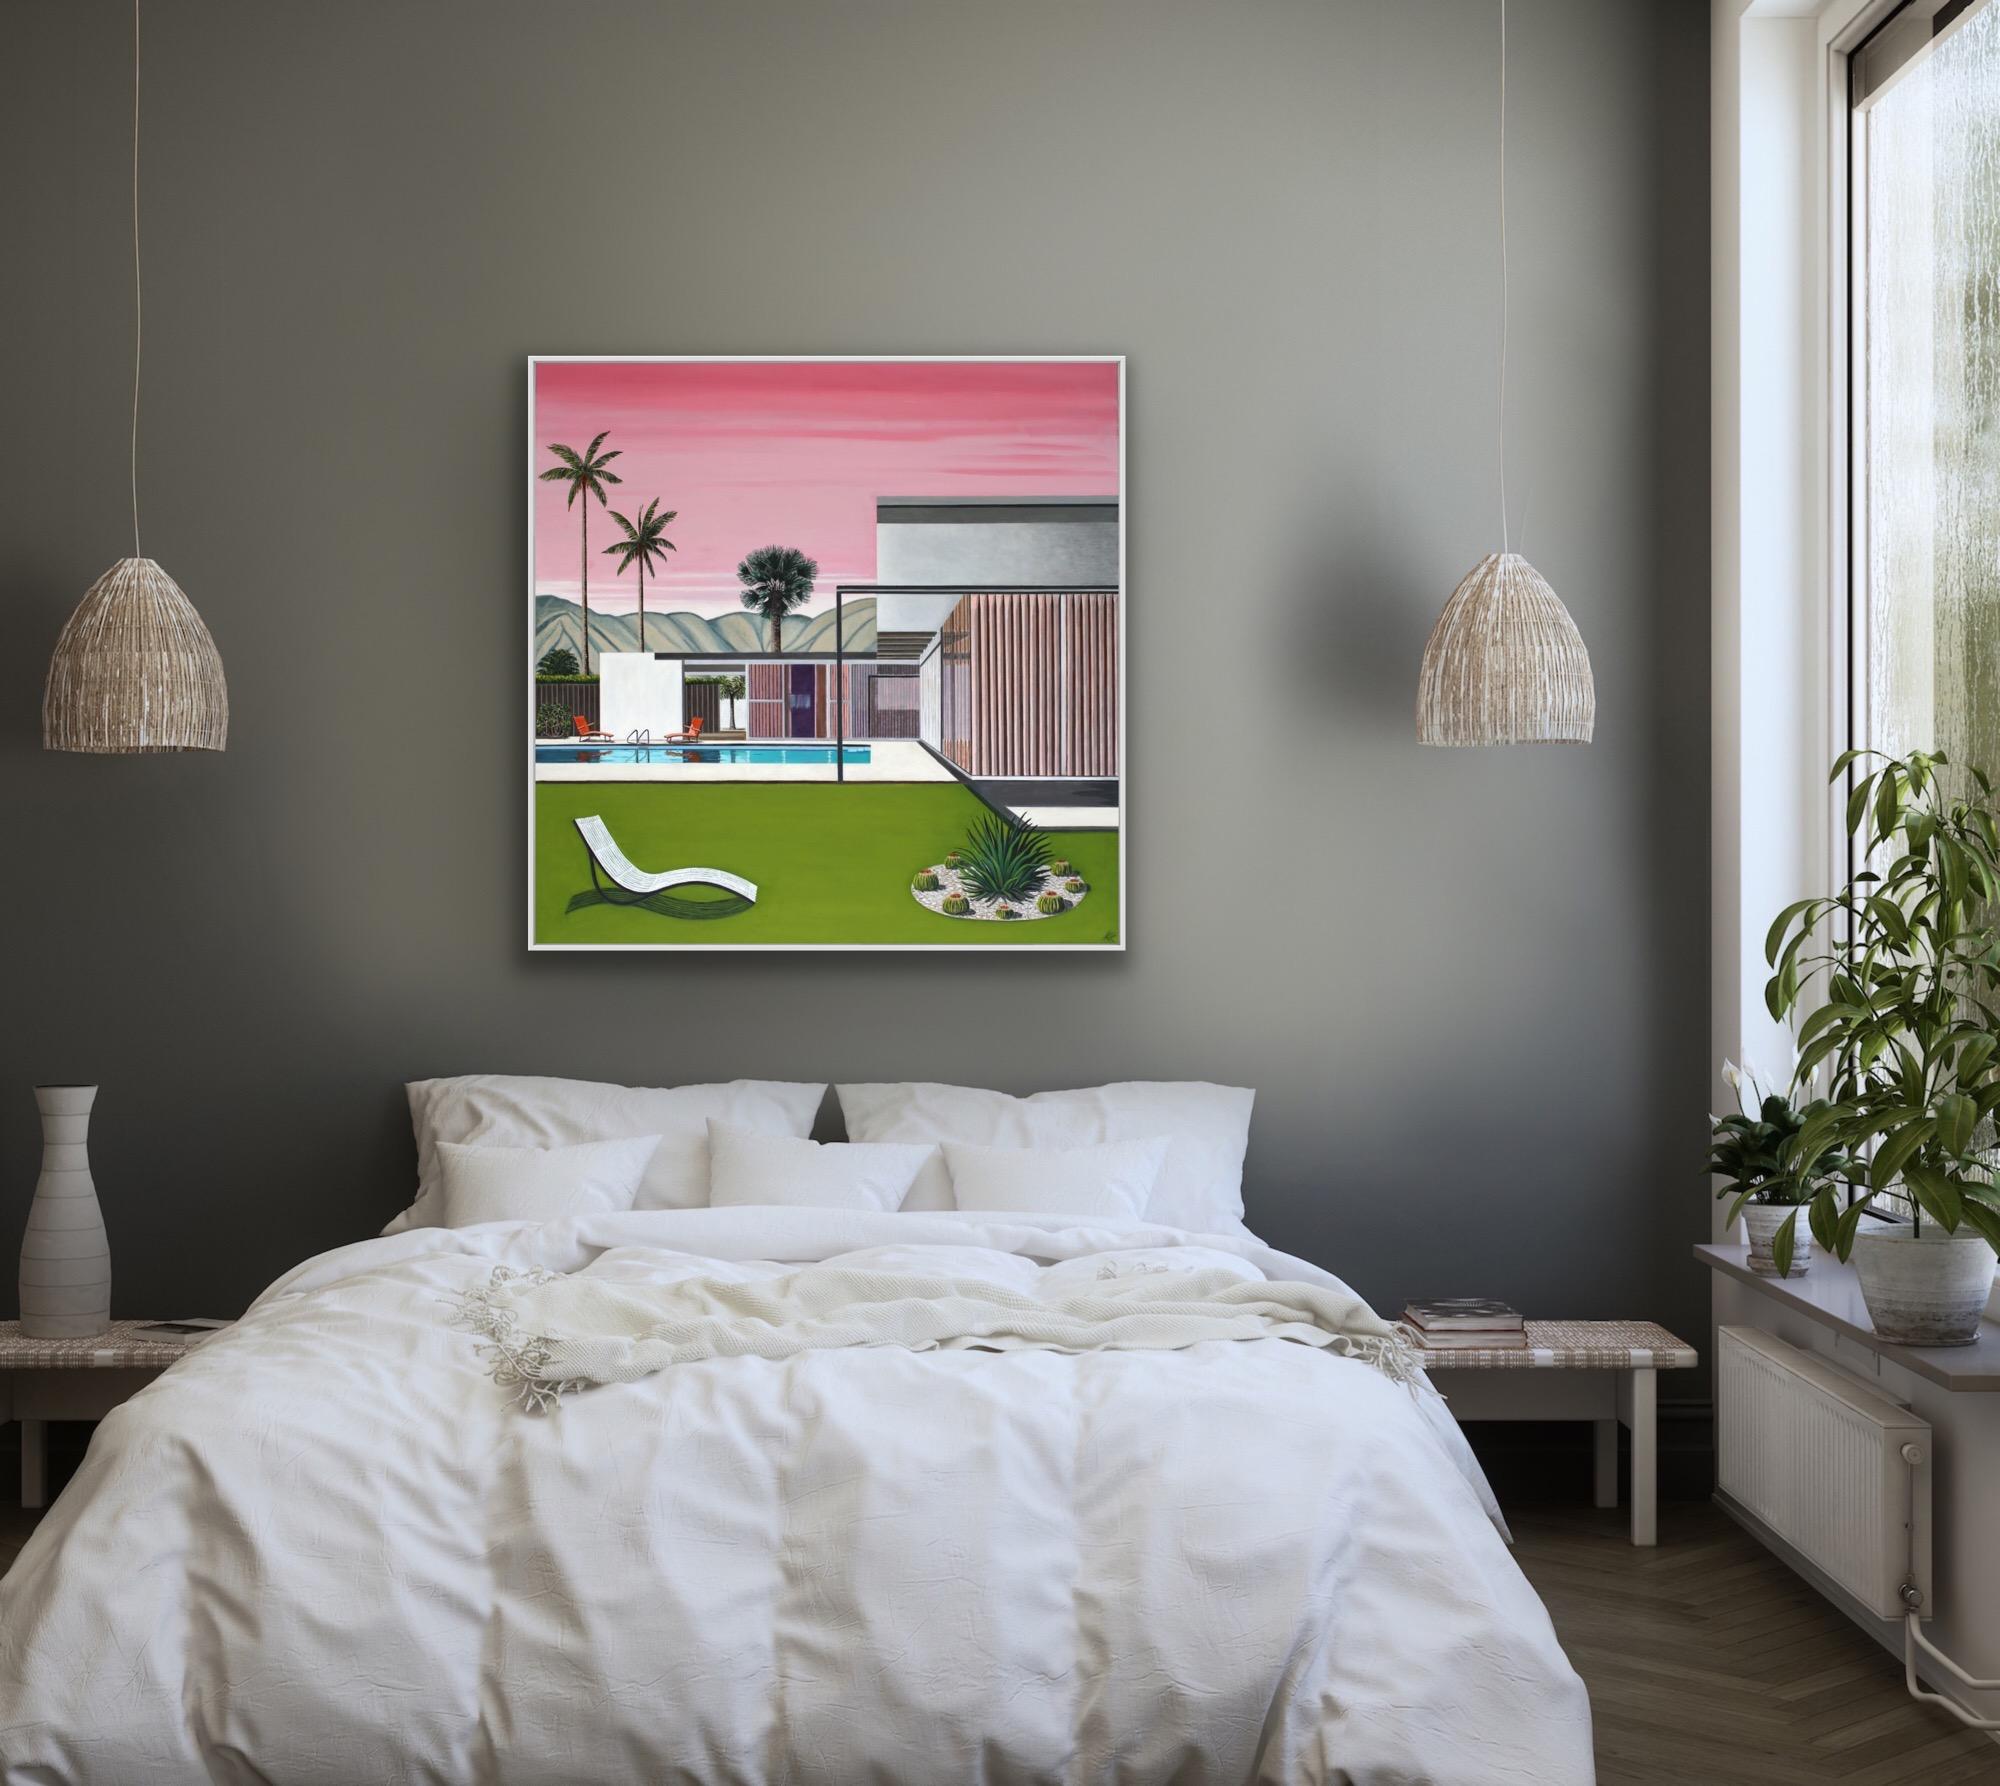 This is a painting from my series of architecural paintings. In this particular painting I have played with colour by adding a striking cinematic pink sky which contrasts against a turquoise pool and a green grass garden. I love mid century